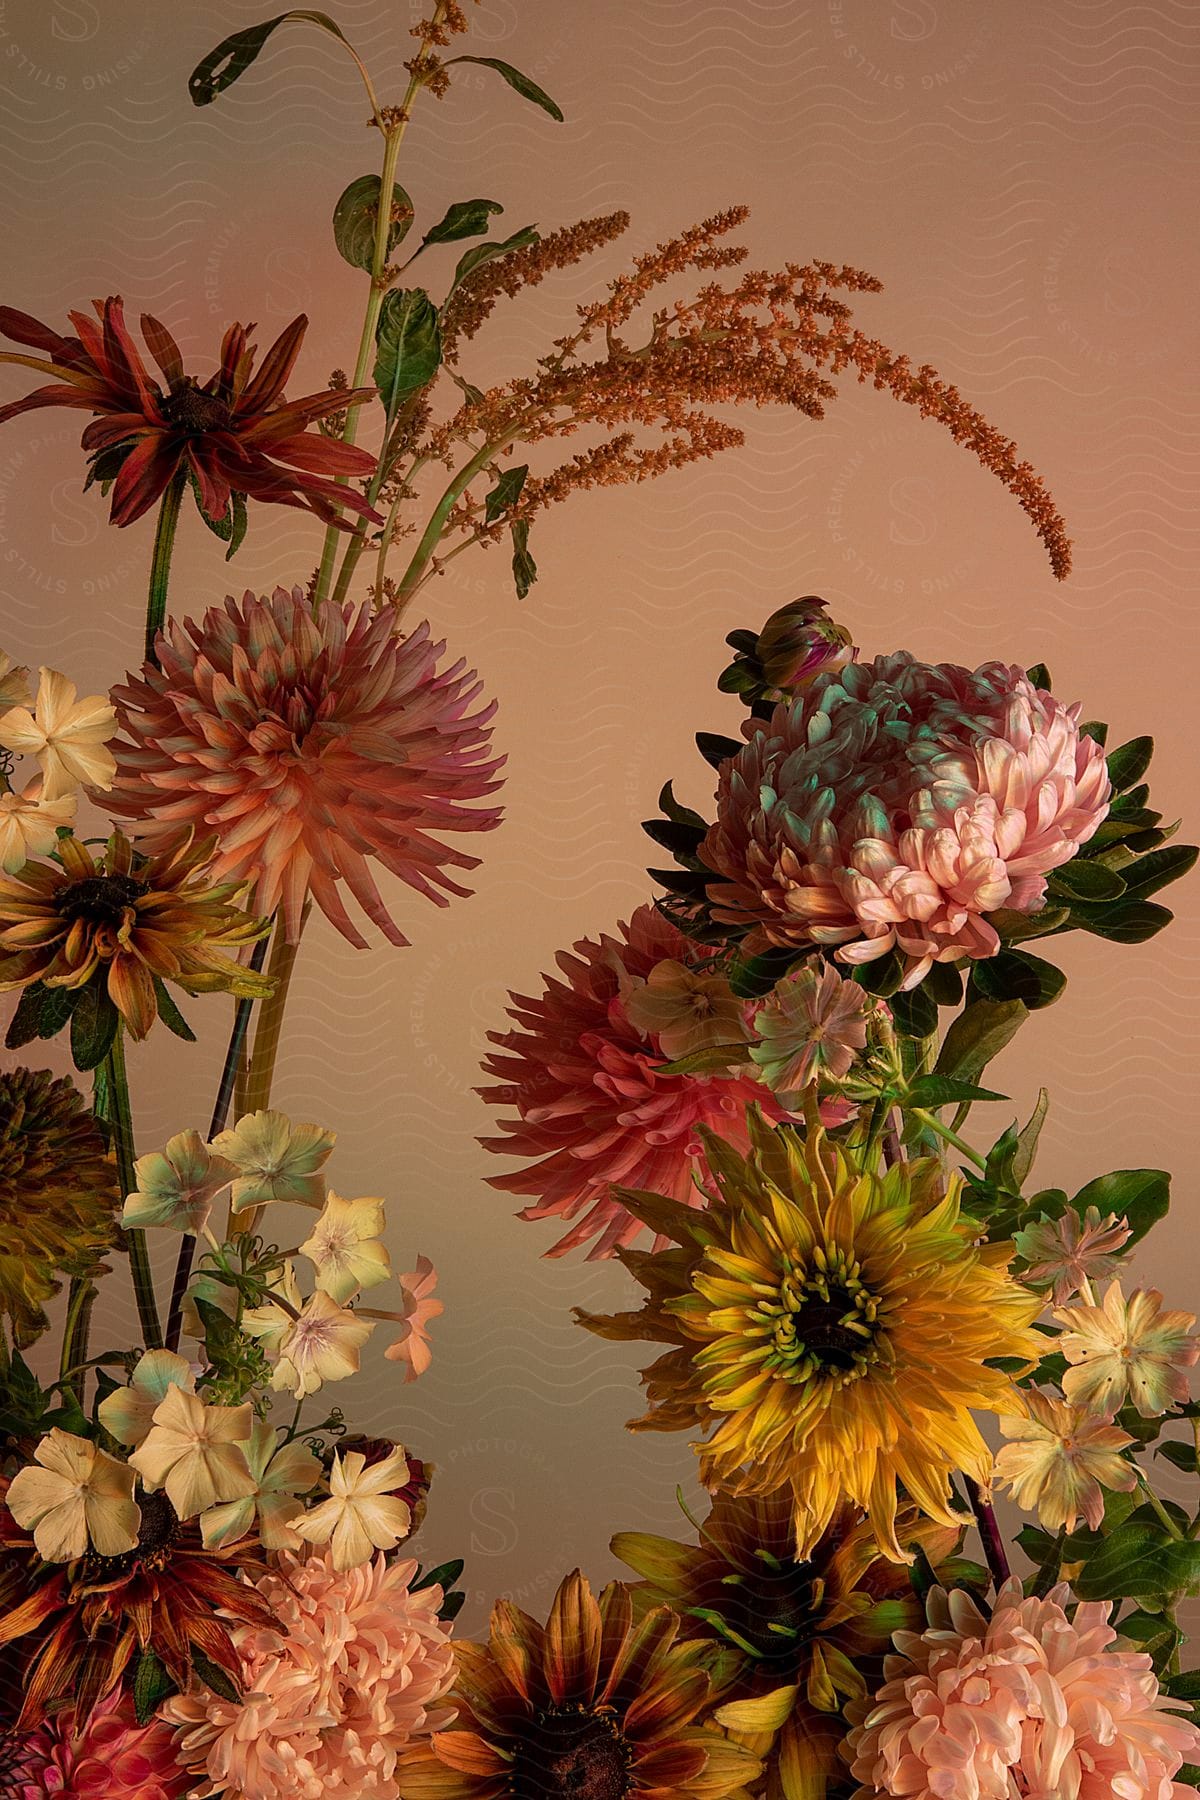 A variety of colorful flowers including dahlias and sunflowers and other flowers against a neutral background.